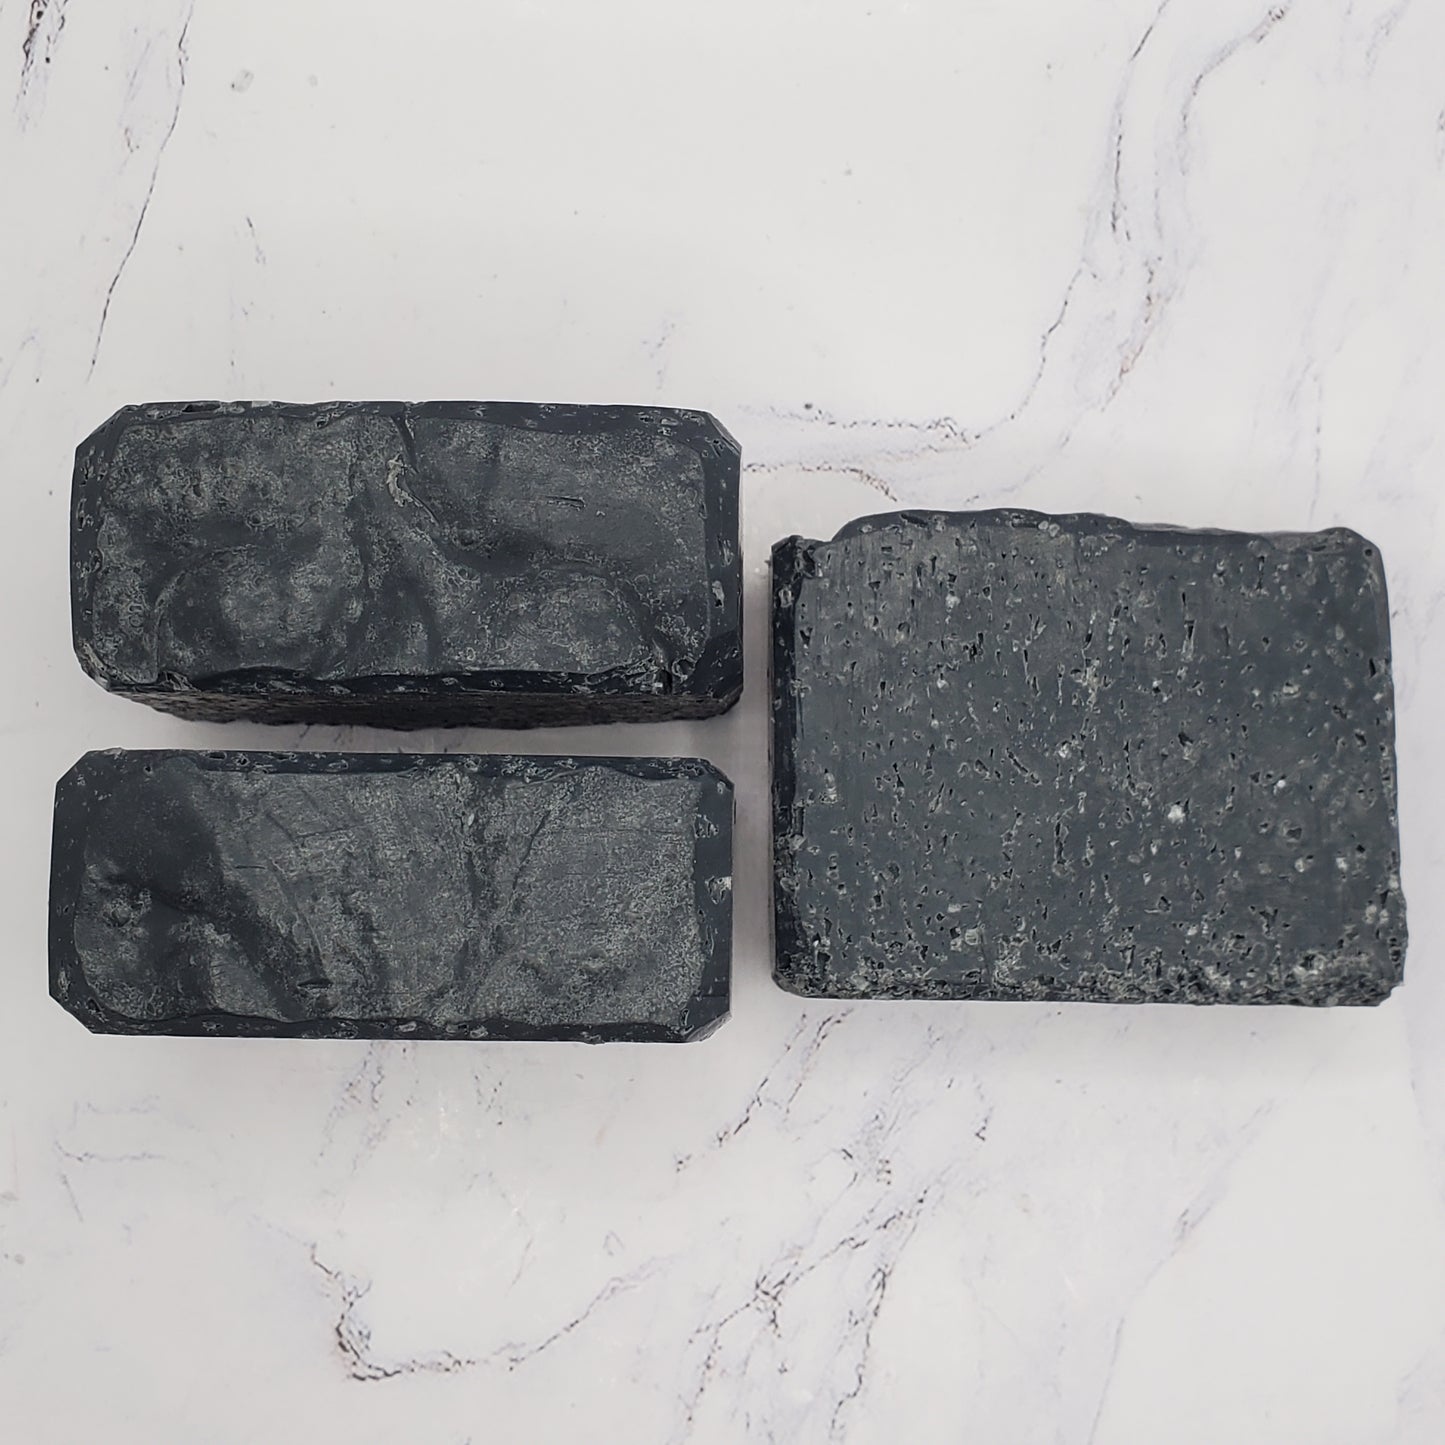 Salt & Charcoal Bar Soap with Rosemary and Eucalyptus Essential Oils